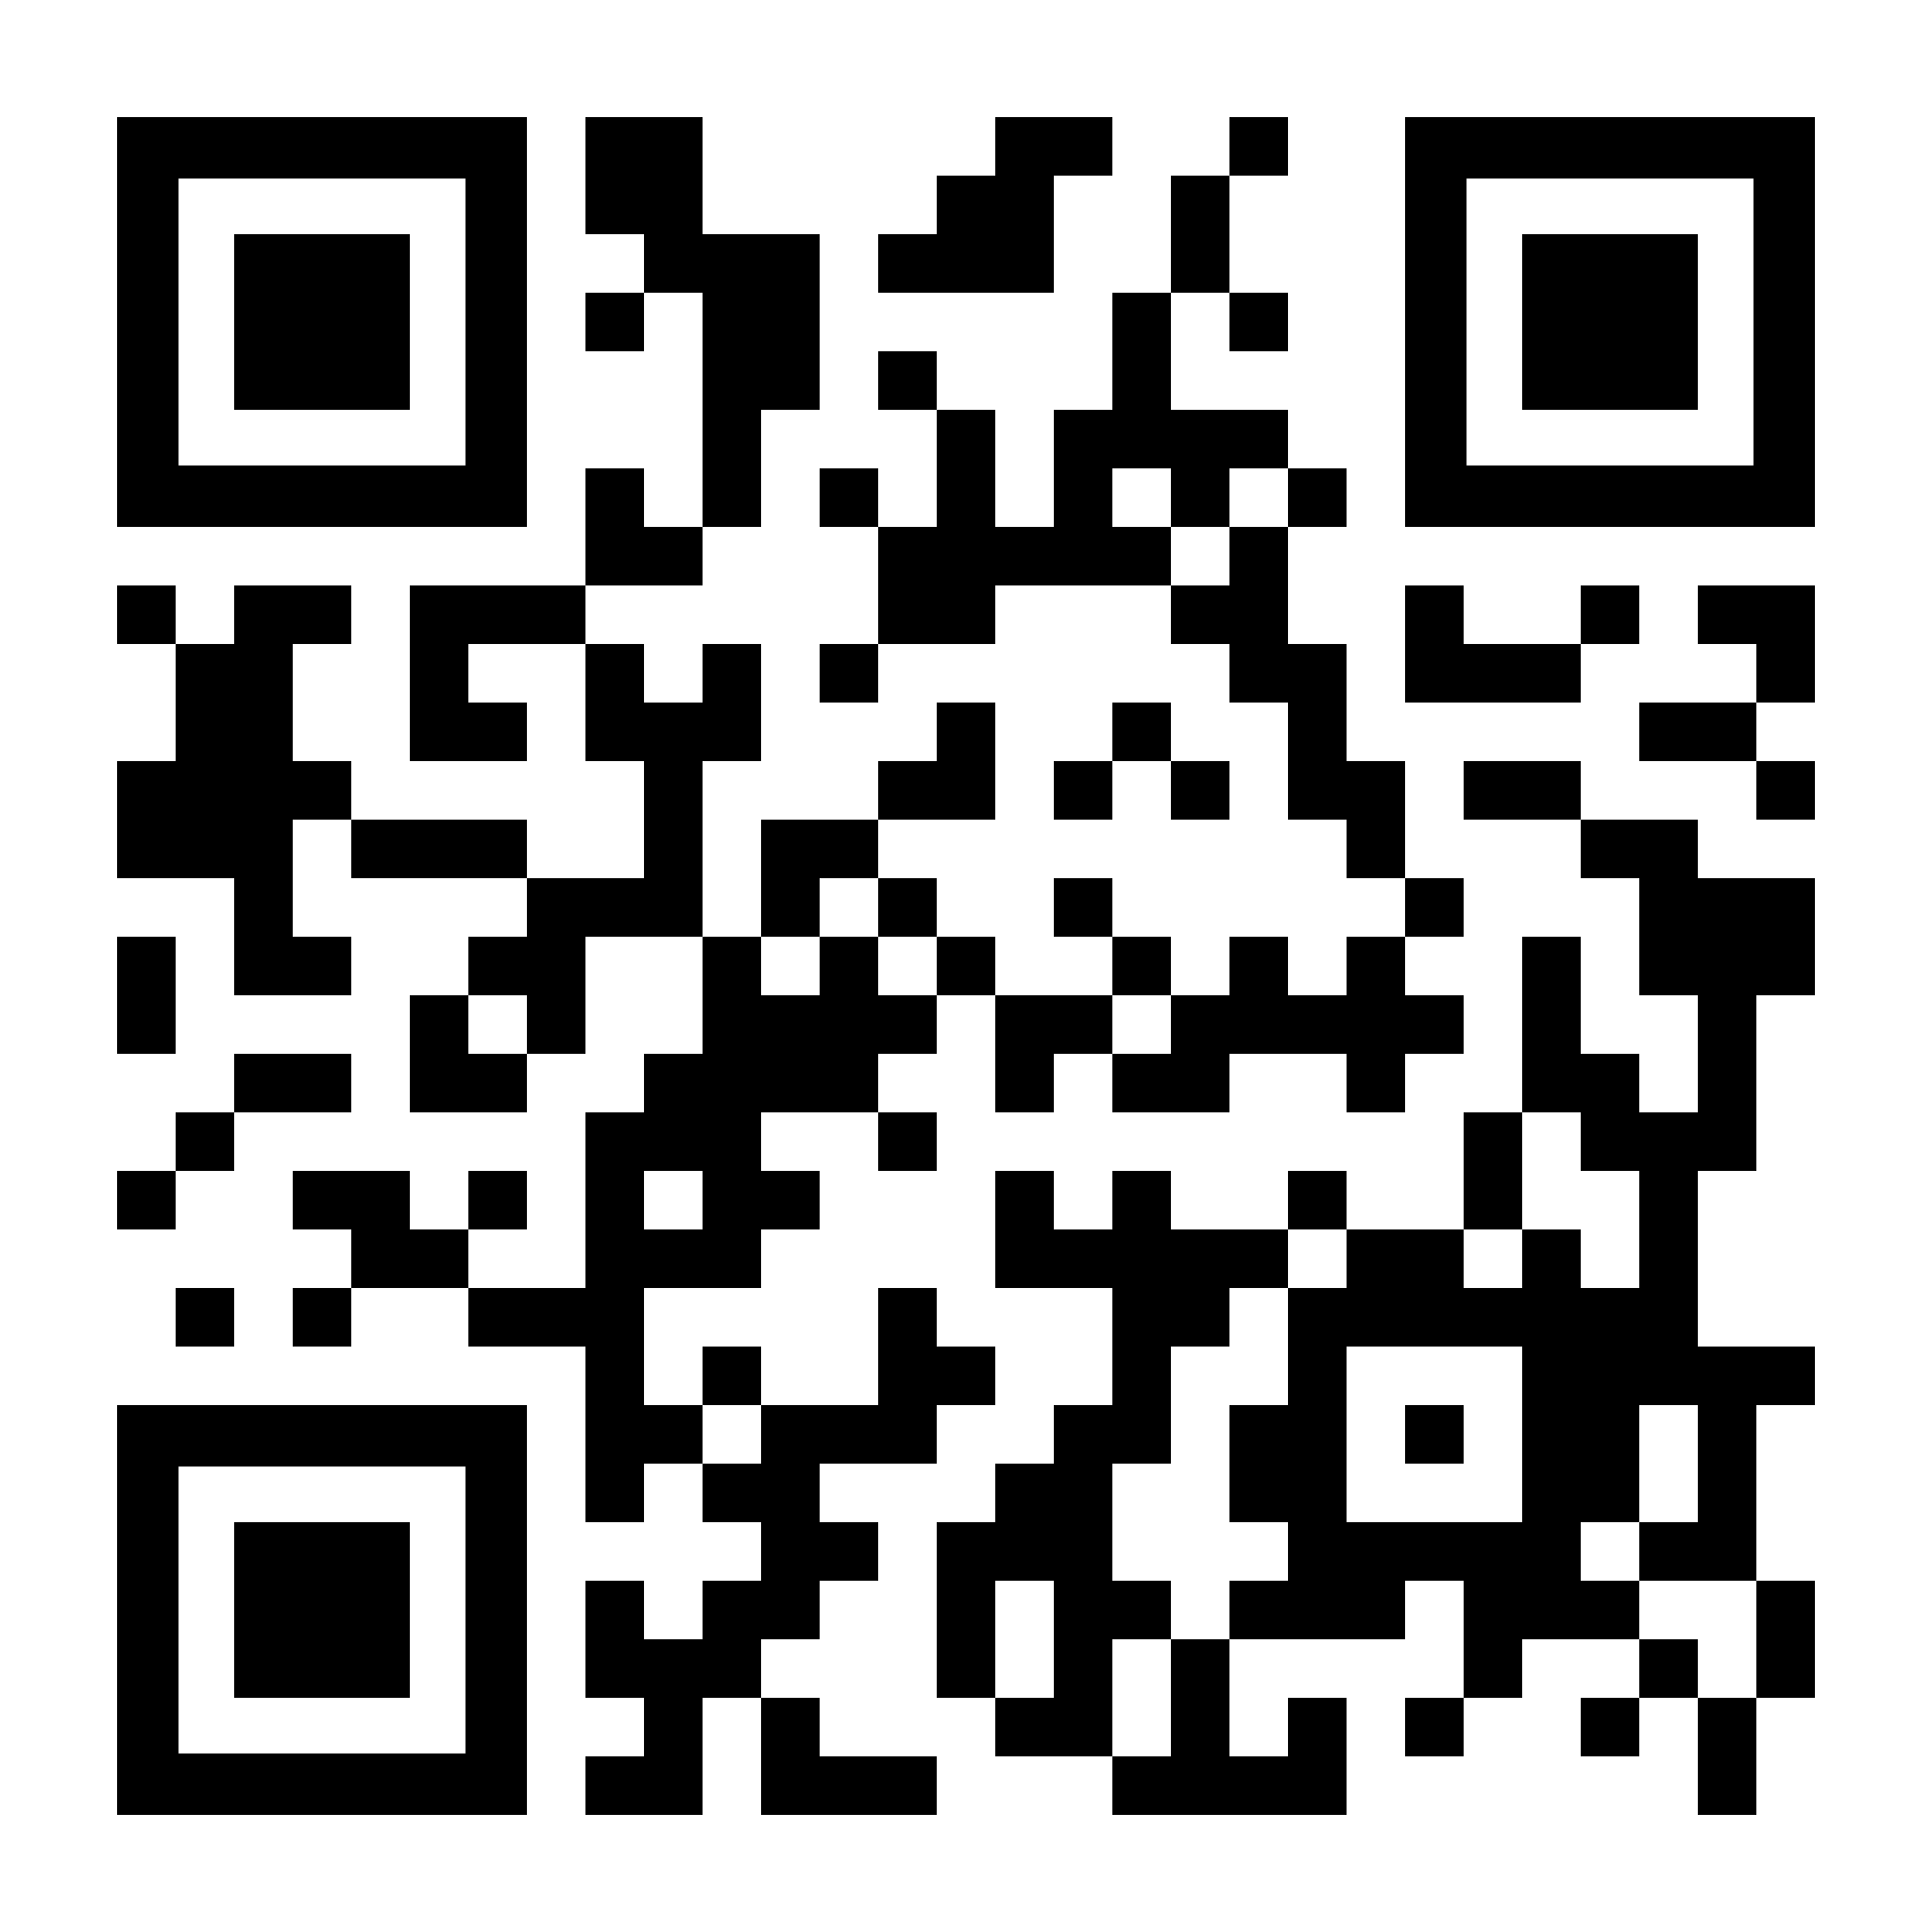 QR Code that takes you to a survey to provide input on bond restructuring